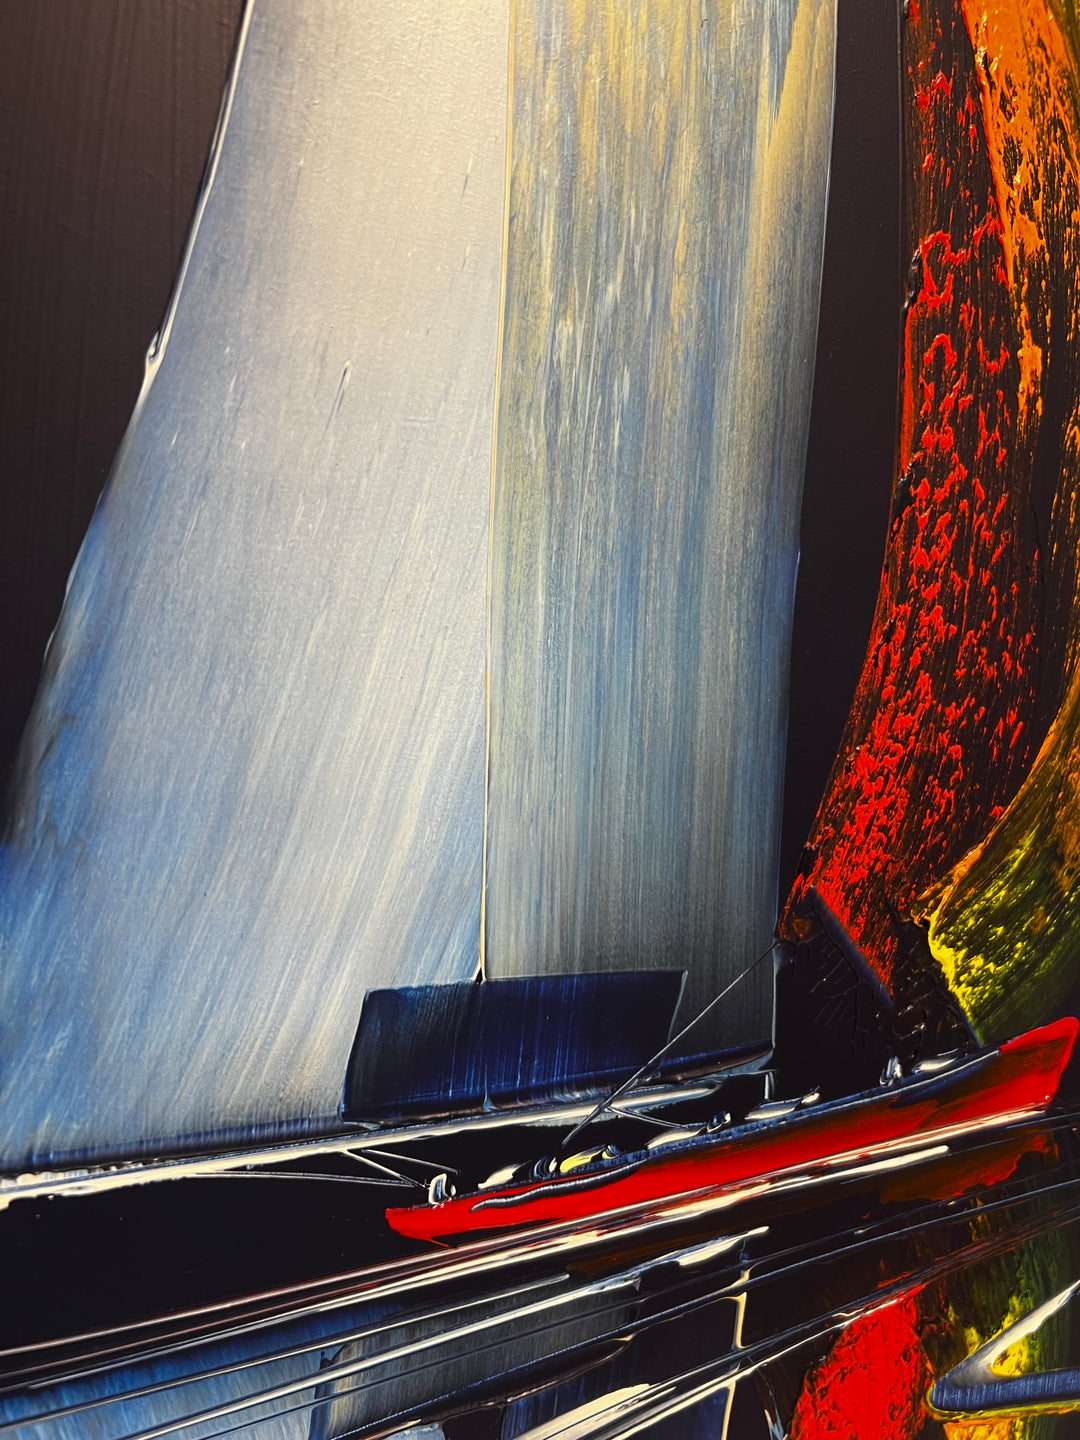 Colourful Sails III by Duncan MacGregor